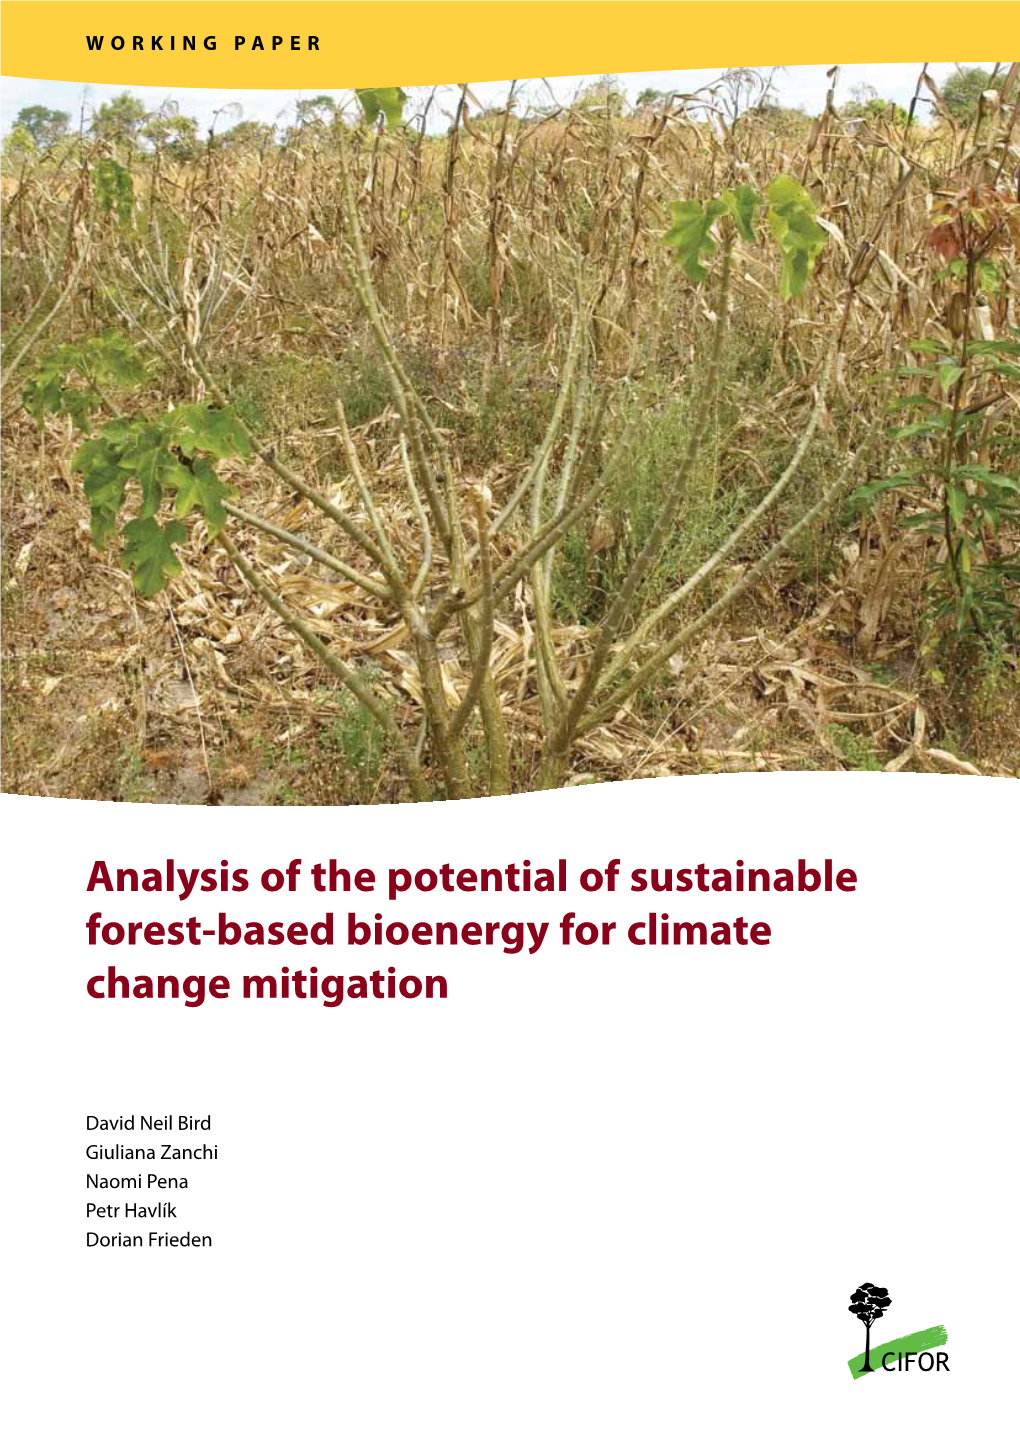 Analysis of the Potential of Sustainable Forest-Based Bioenergy for Climate Change Mitigation